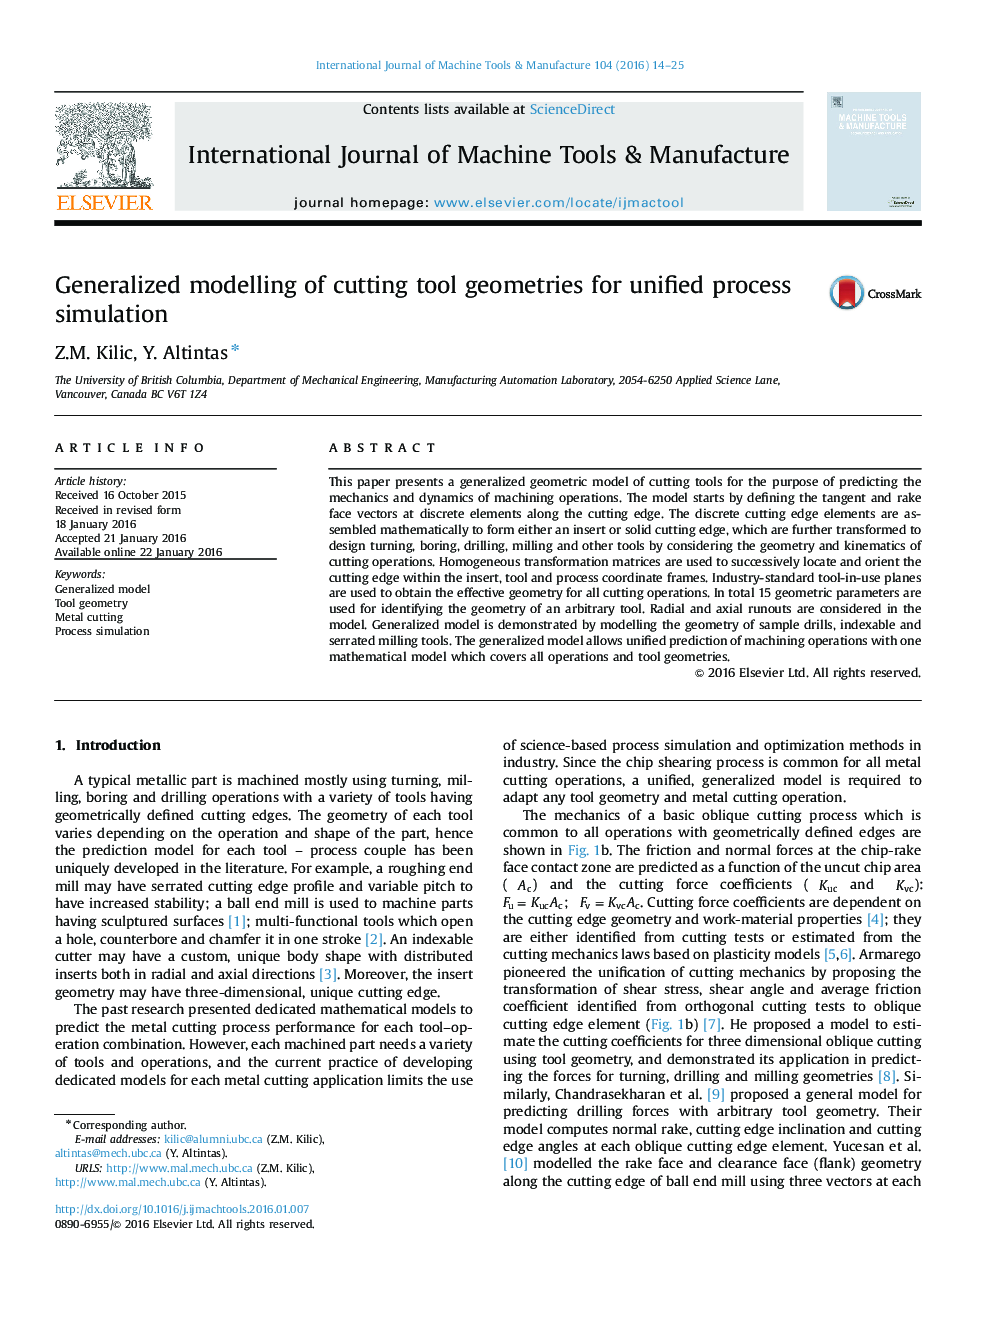 Generalized modelling of cutting tool geometries for unified process simulation